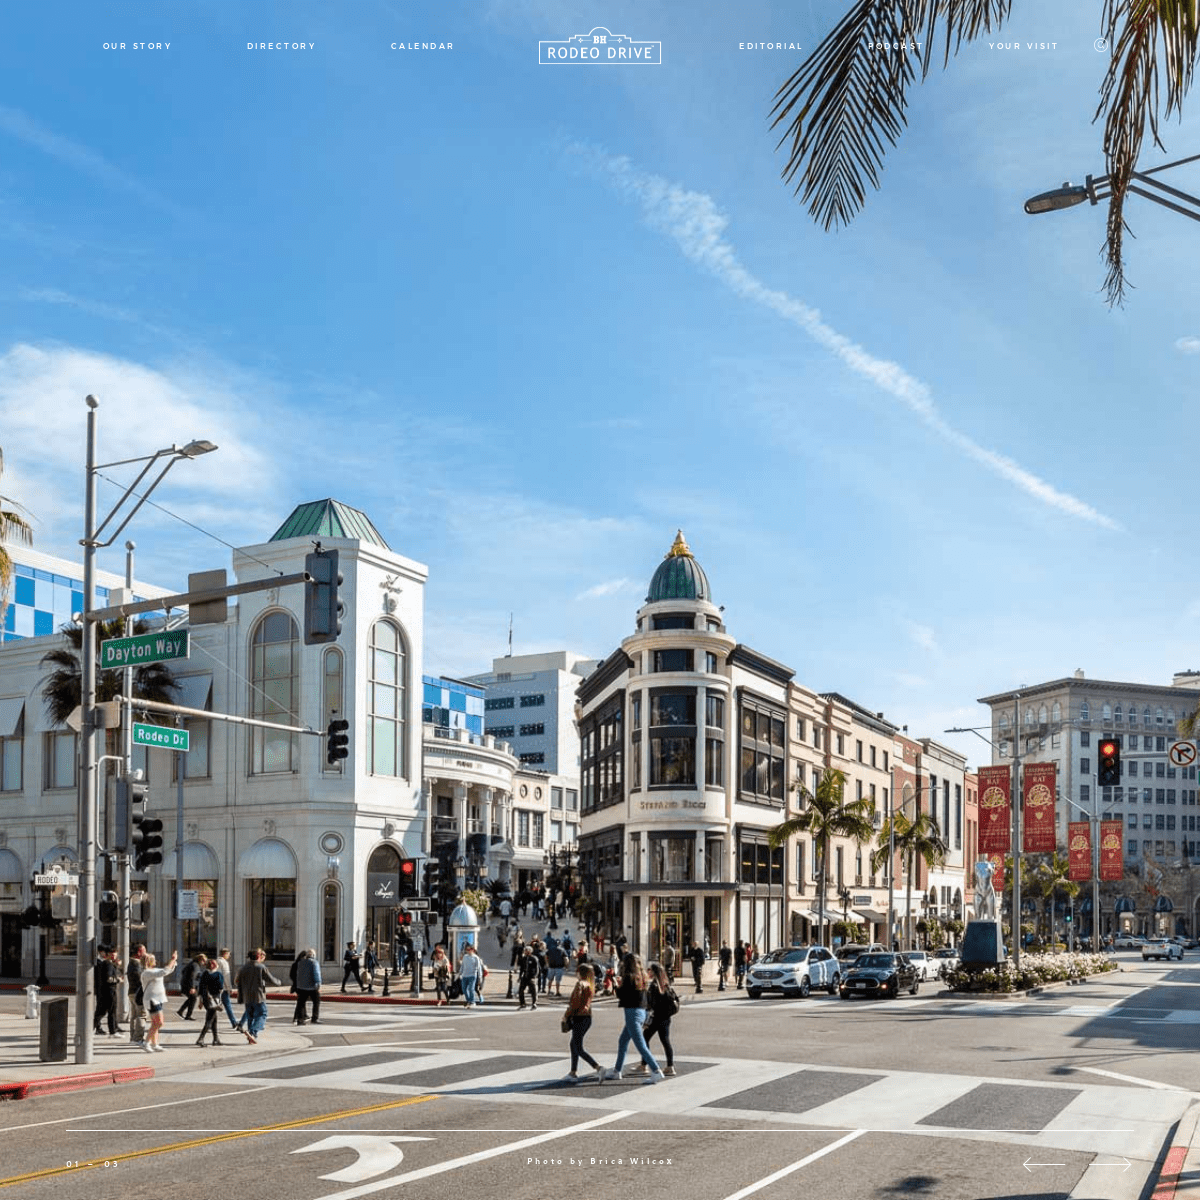 A complete backup of https://rodeodrive-bh.com